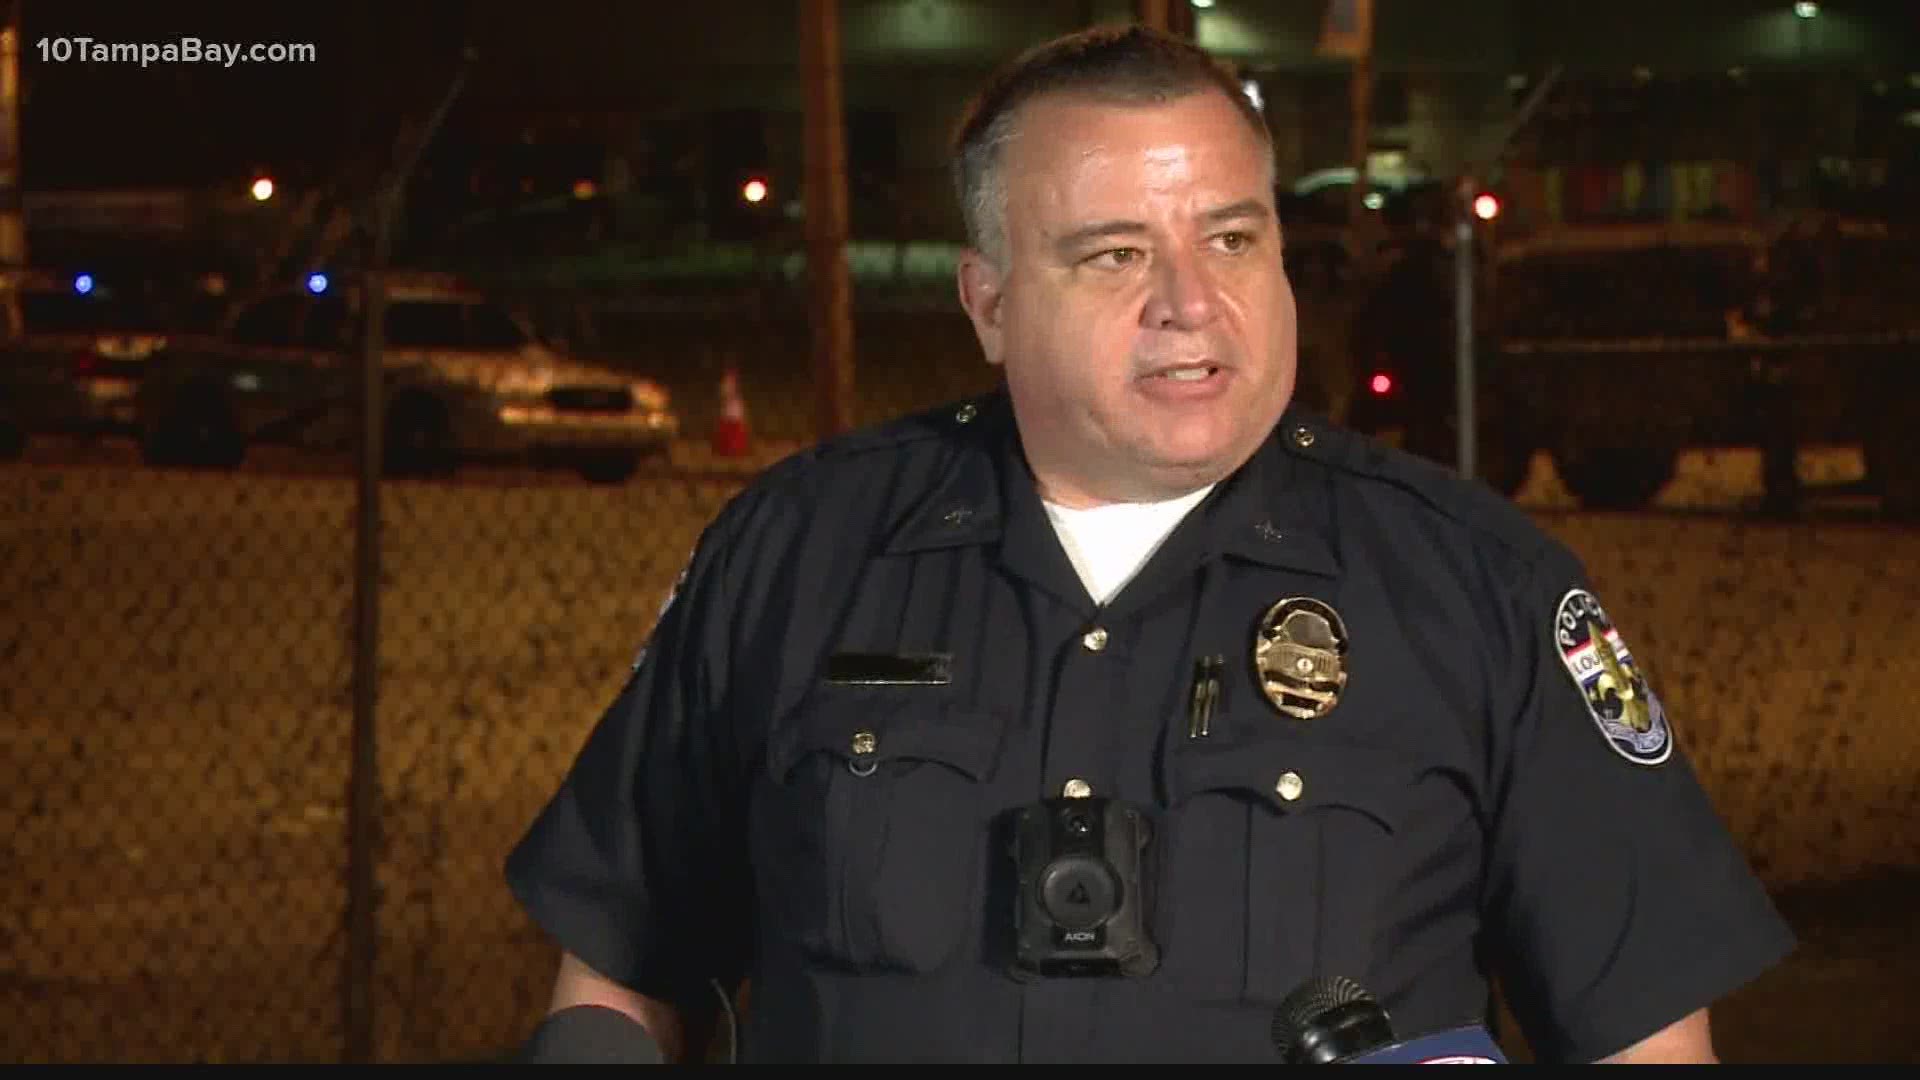 Chief Robert Schroeder said two officers are in stable condition and one suspect has been arrested.